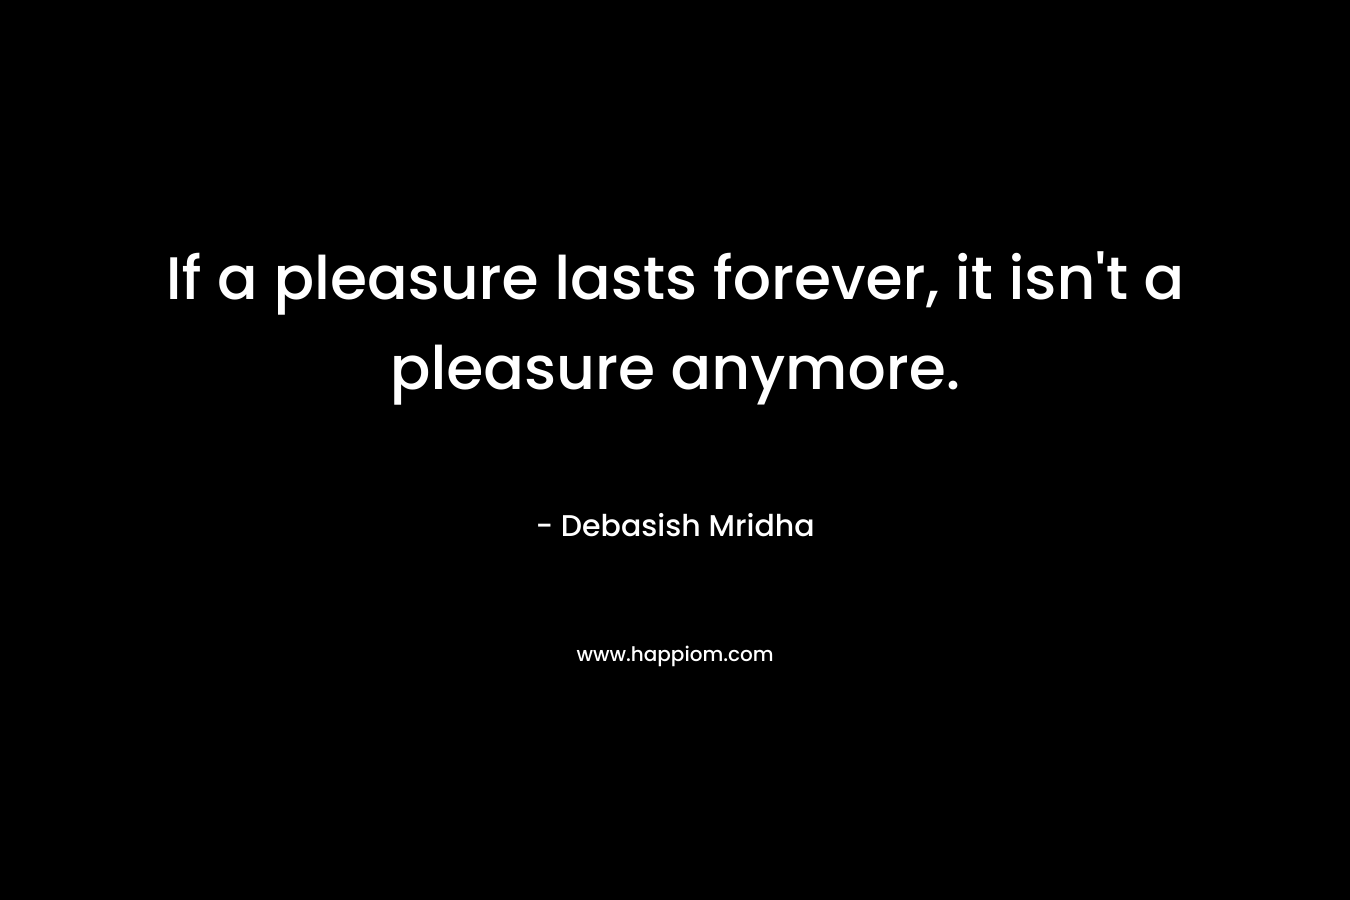 If a pleasure lasts forever, it isn't a pleasure anymore.